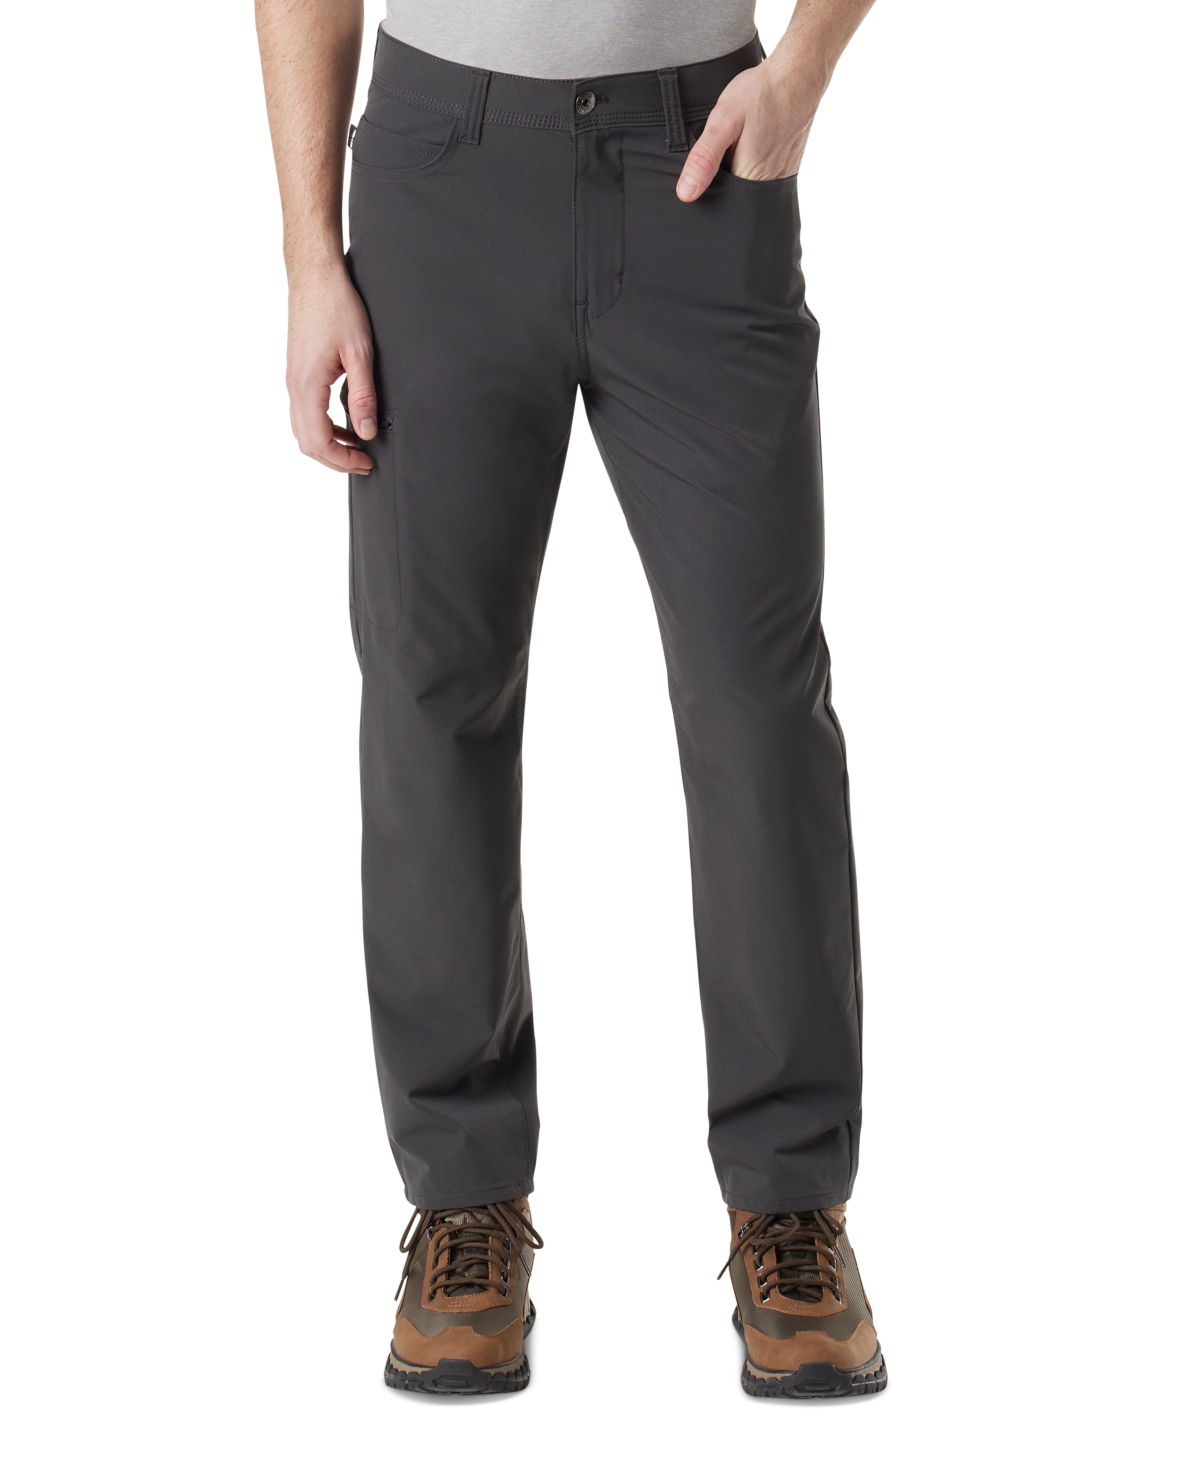 Men's Hybrid Trencher Straight-Fit 4-Way Stretch Micro-Ripstop Tech Pants - Caviar